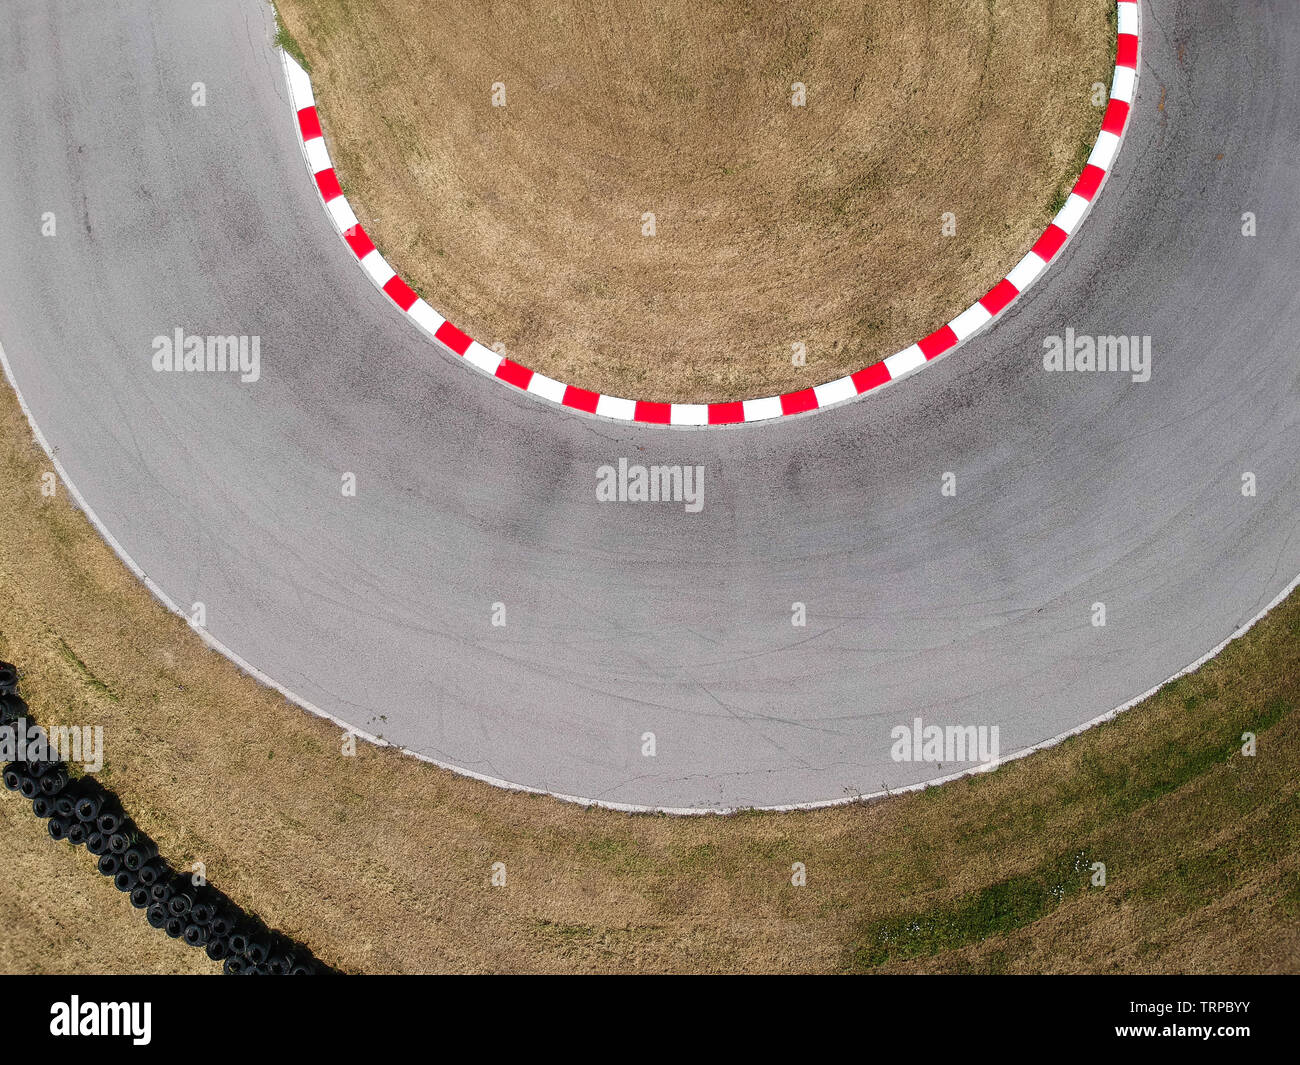 Curves on karting race track, aerial view background. Stock Photo